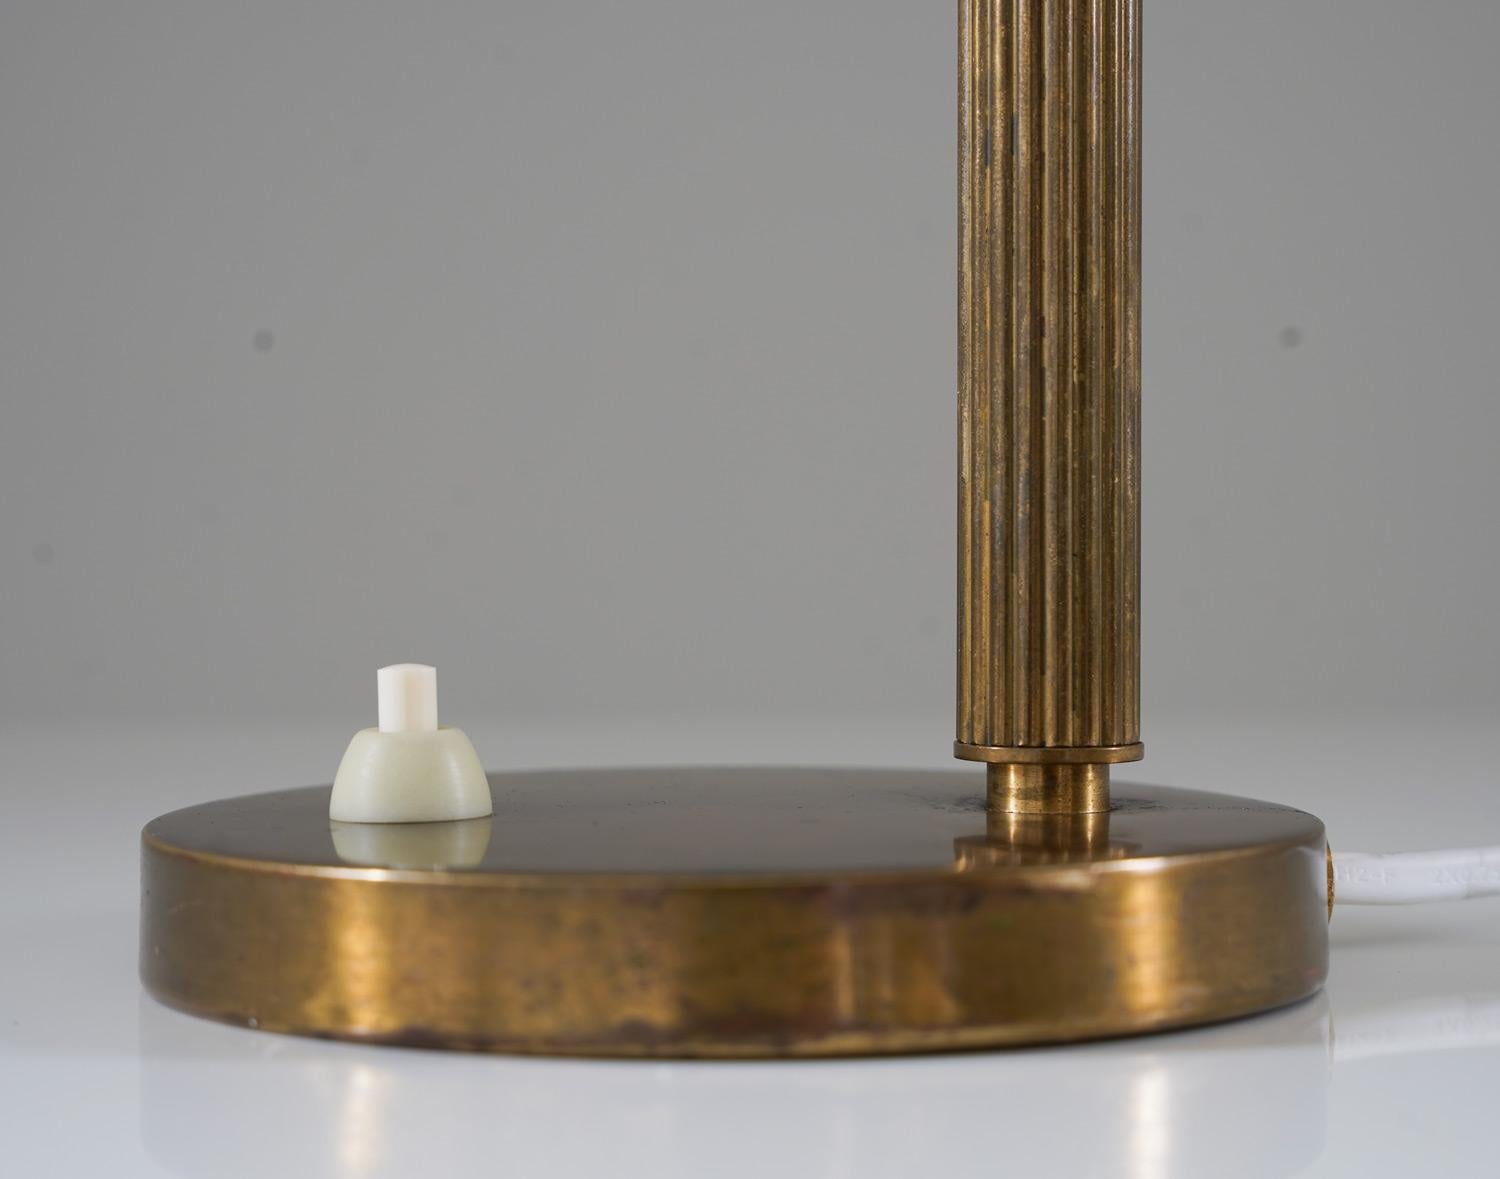 Swedish Midcentury Table Lamp in Perforated Brass In Good Condition For Sale In Karlstad, SE